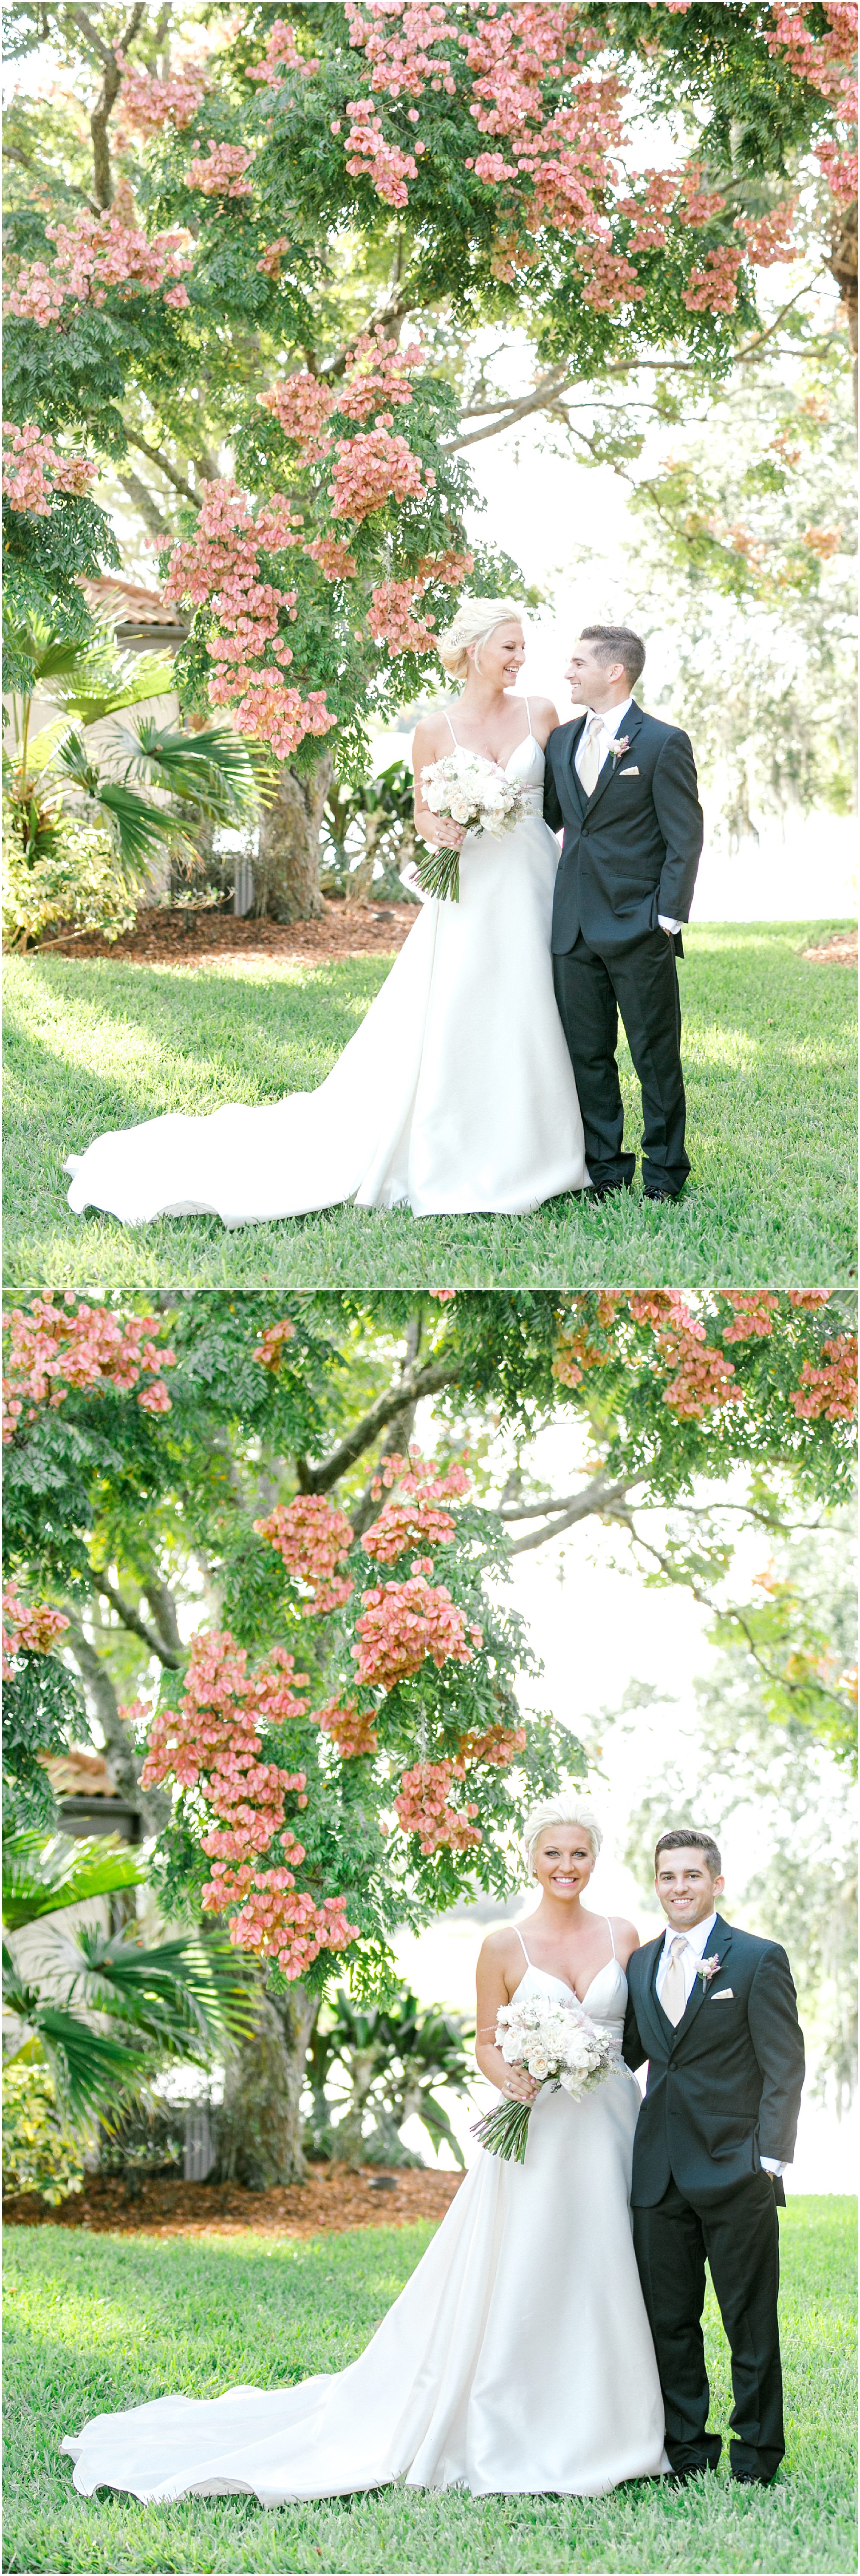 Bride and groom taking portraits standing under green trees with pink flowers on them